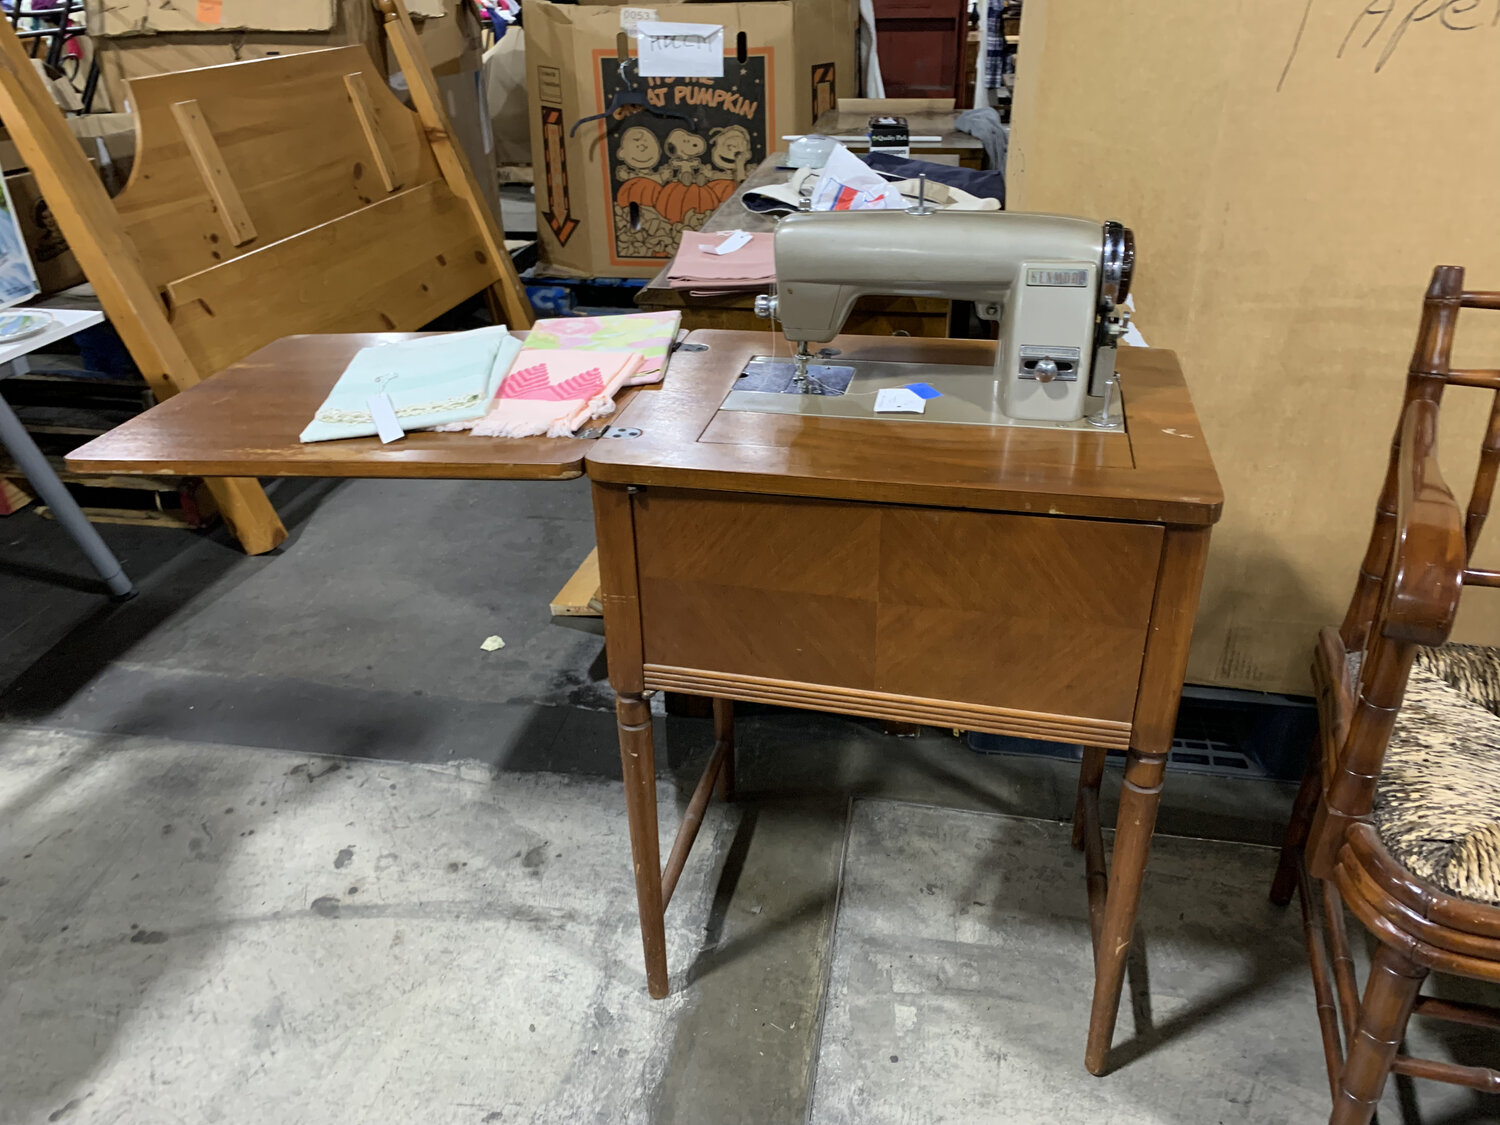 Kenmore Sewing Machine with SewSteady Table $200 - Doylestown, PA Patch